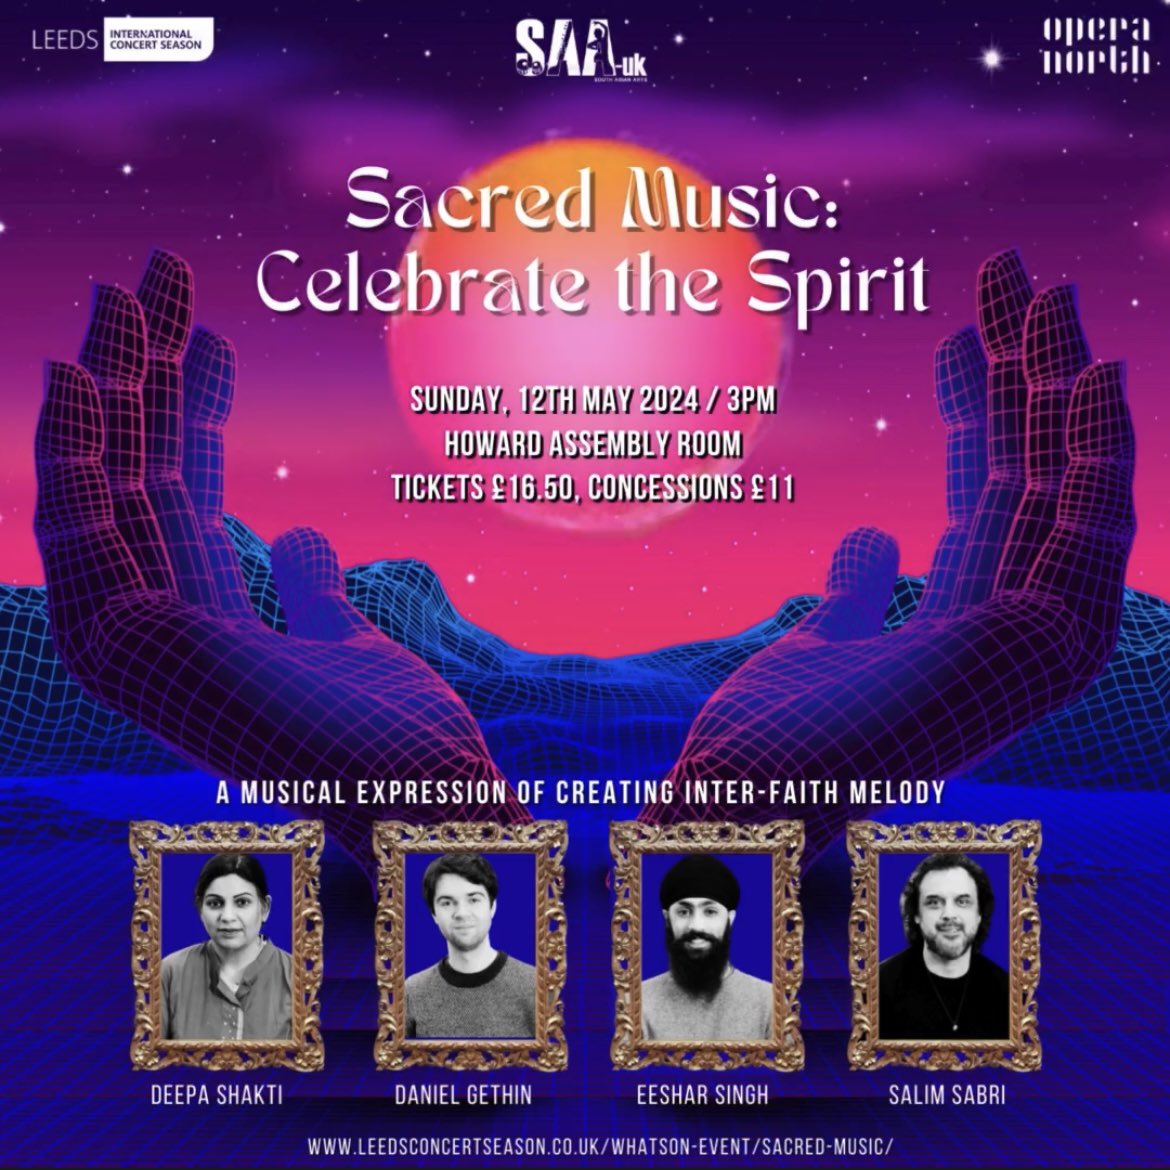 Join the @southasianartuk in the launch of ‘Sacred Music: Celebrate the Spirit’! Date: Sunday 12th May Location: @Howard_Assembly Get your tickets here 👉 bit.ly/49UA2Fb